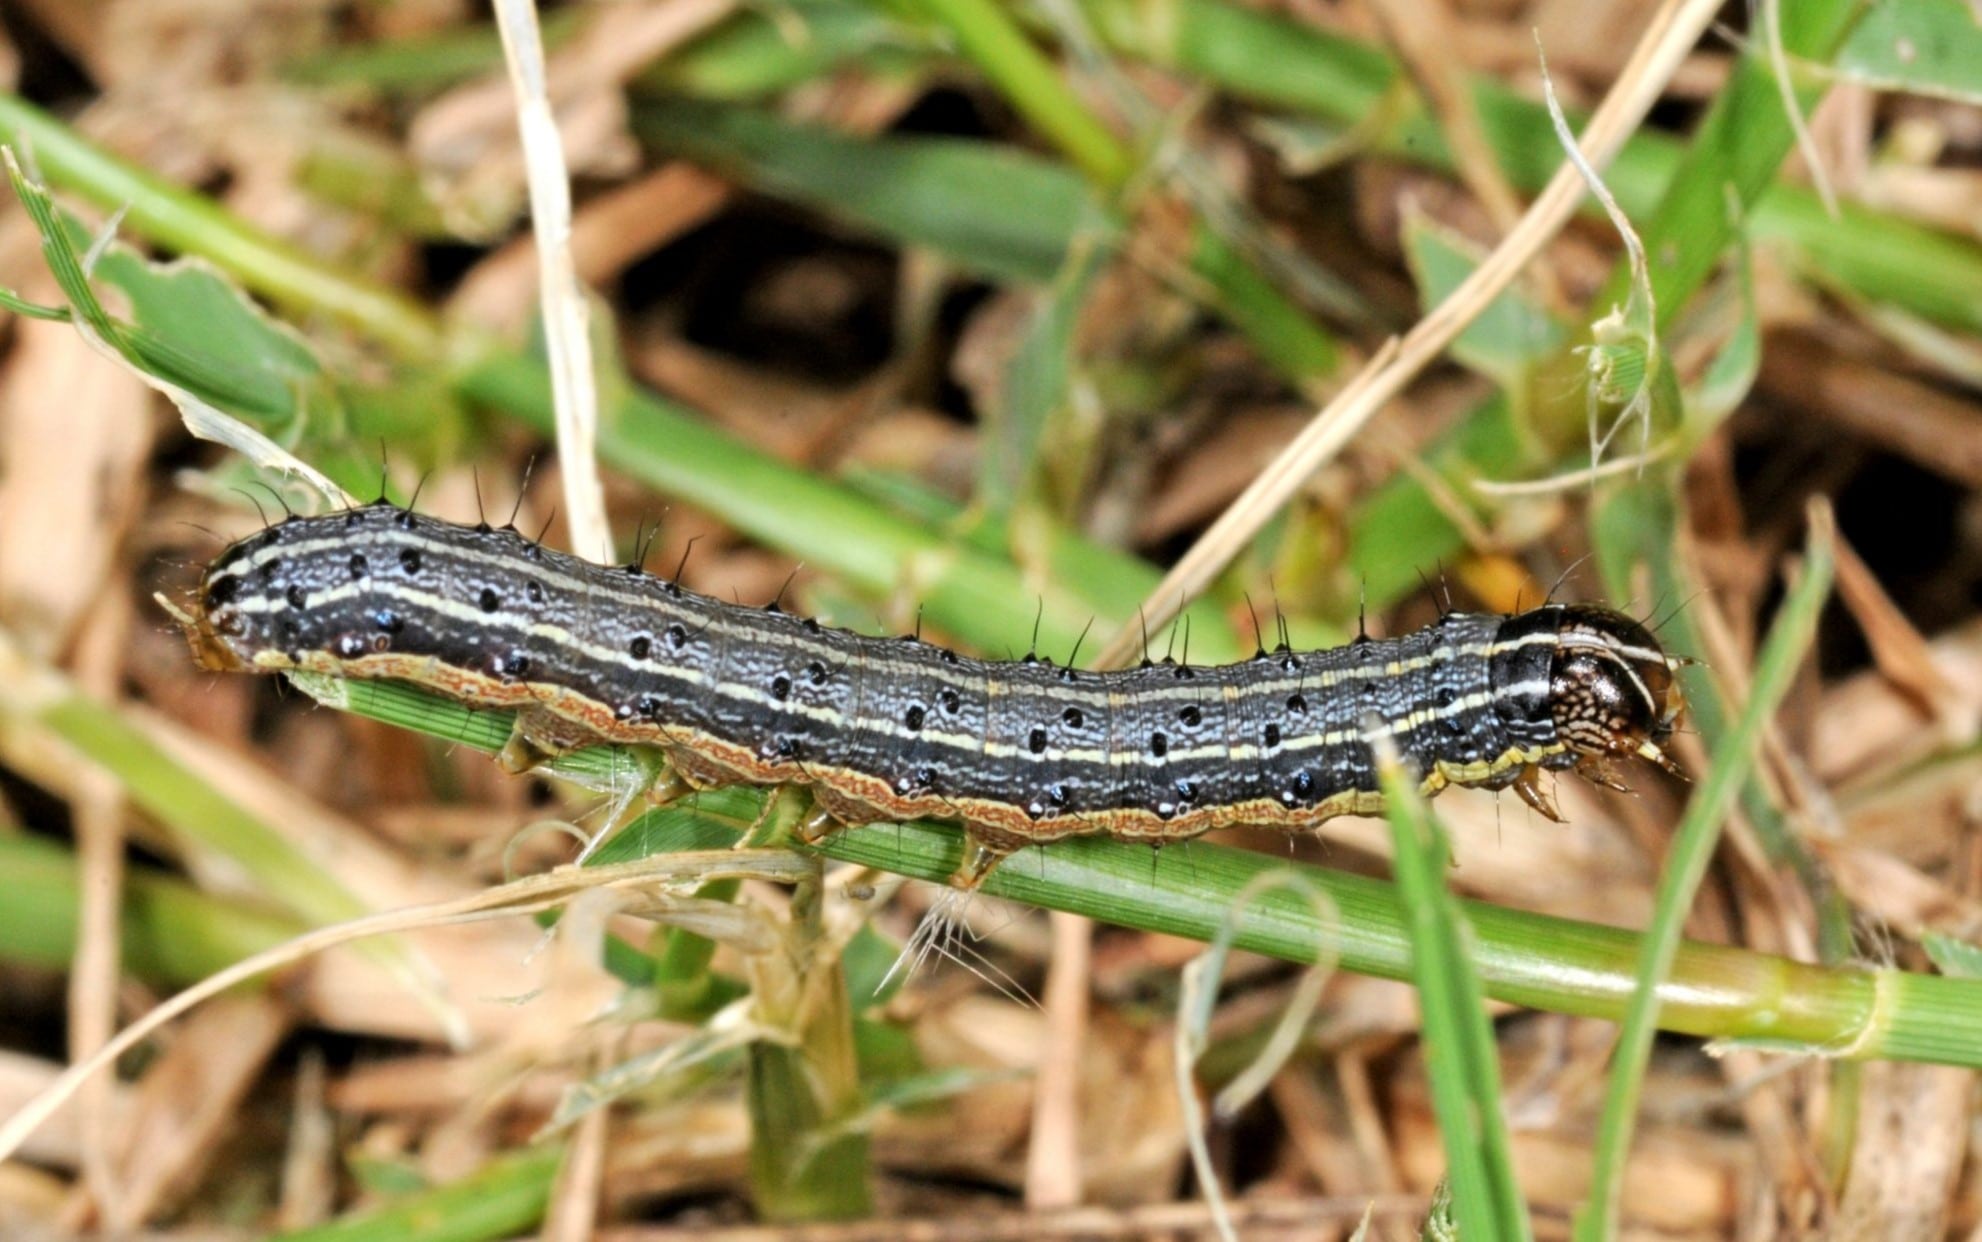 How To Get Rid Of Armyworms In Grass